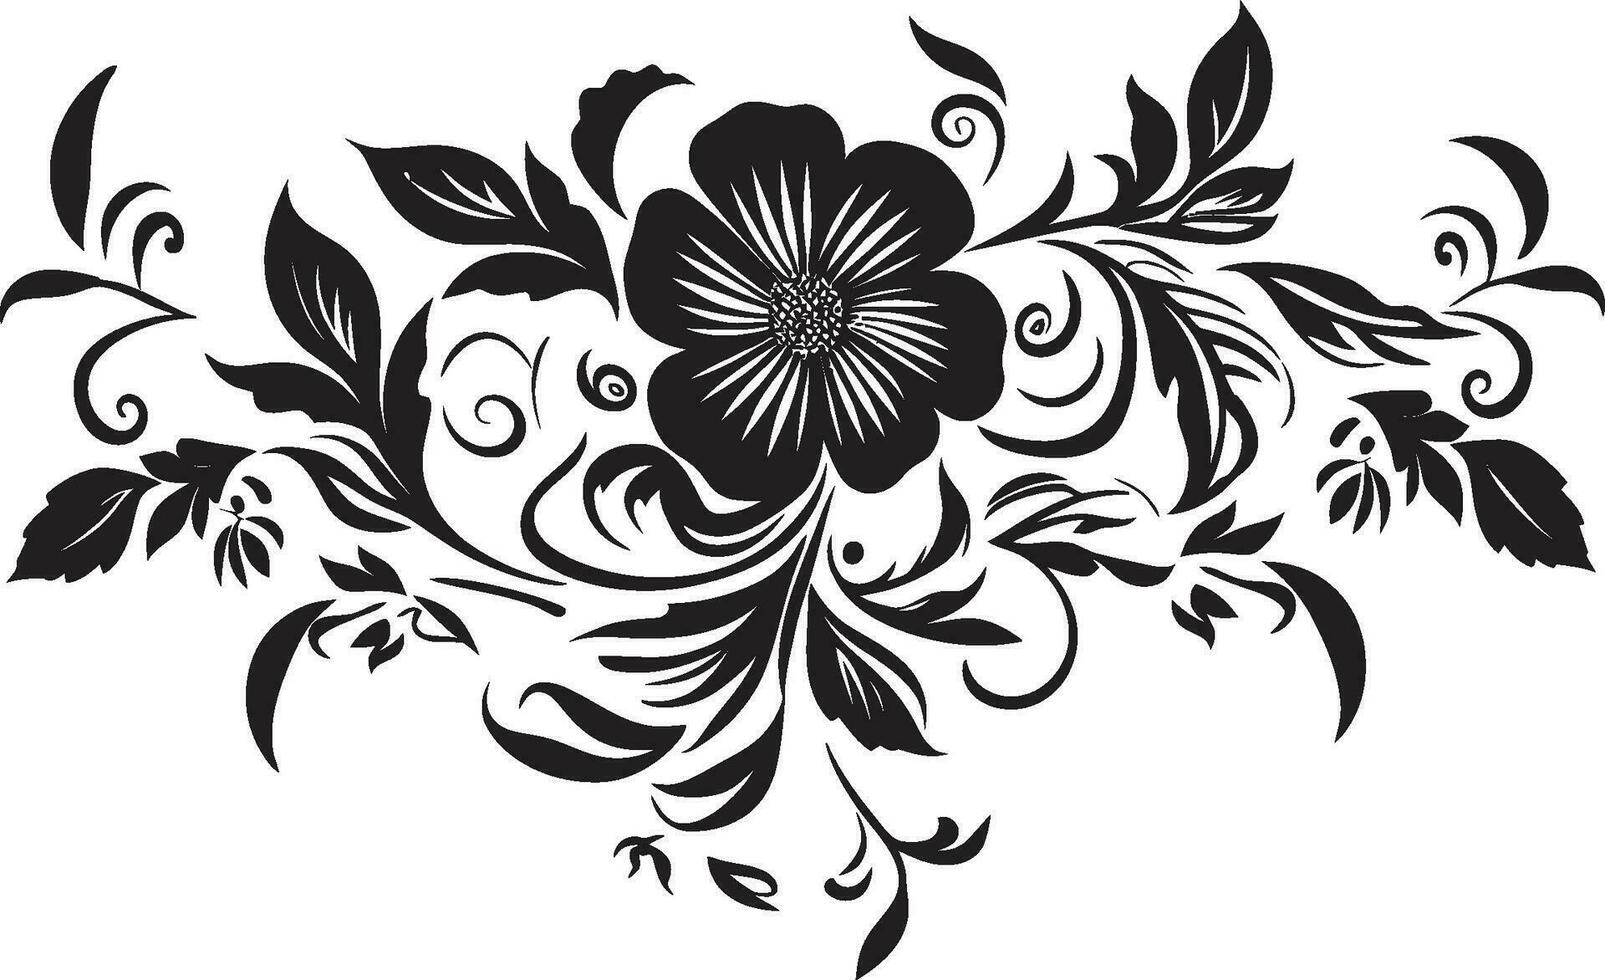 Ethereal Noir Garden Moody Hand Drawn Vector Icons Monochrome Petal Whirl Noir Floral Emblem Sketches